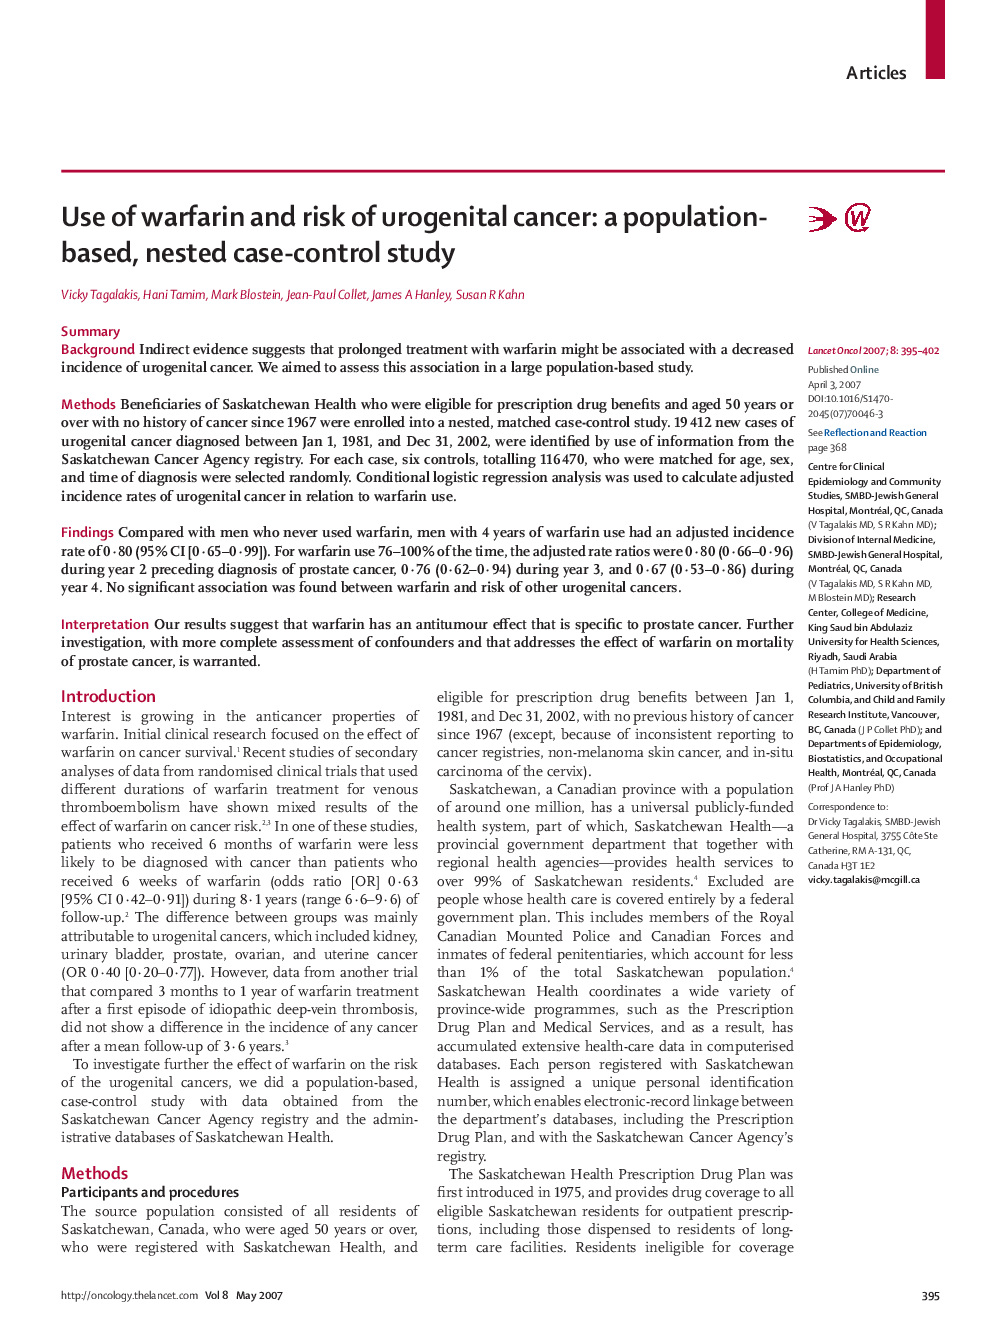 Use of warfarin and risk of urogenital cancer: a population-based, nested case-control study